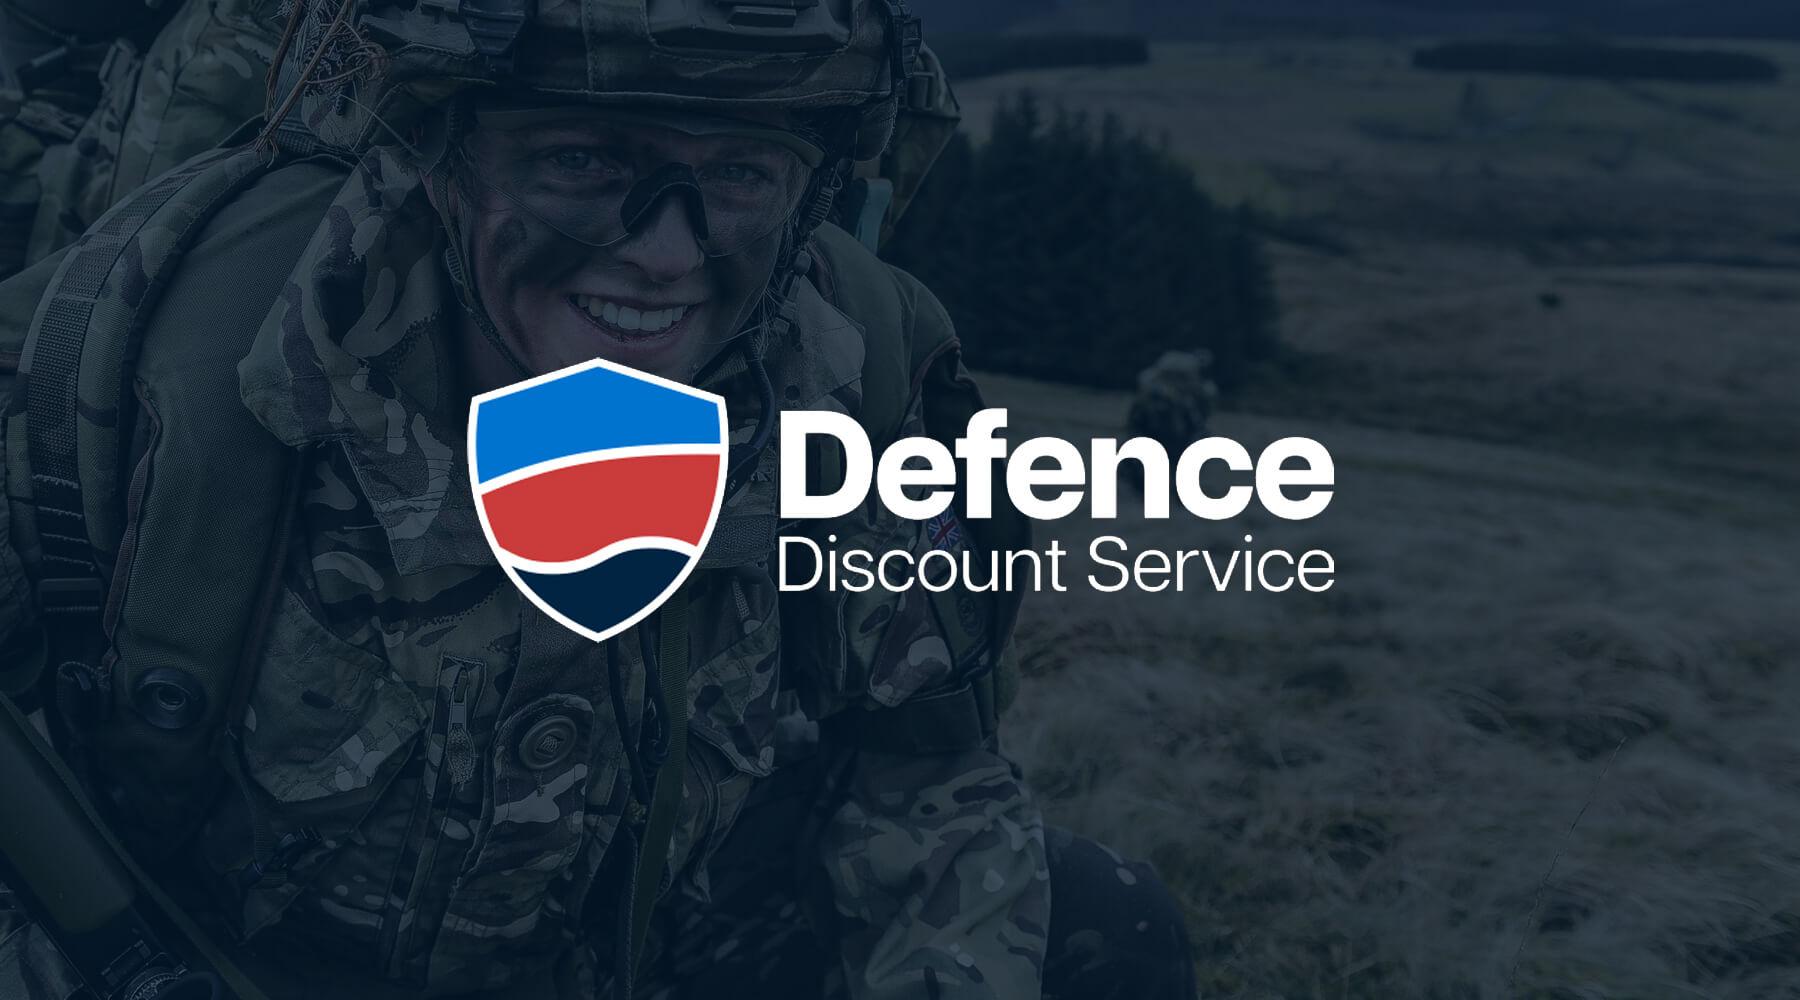 redbaysand partners with the Defence Discount Service to support British veterans and the armed forces community